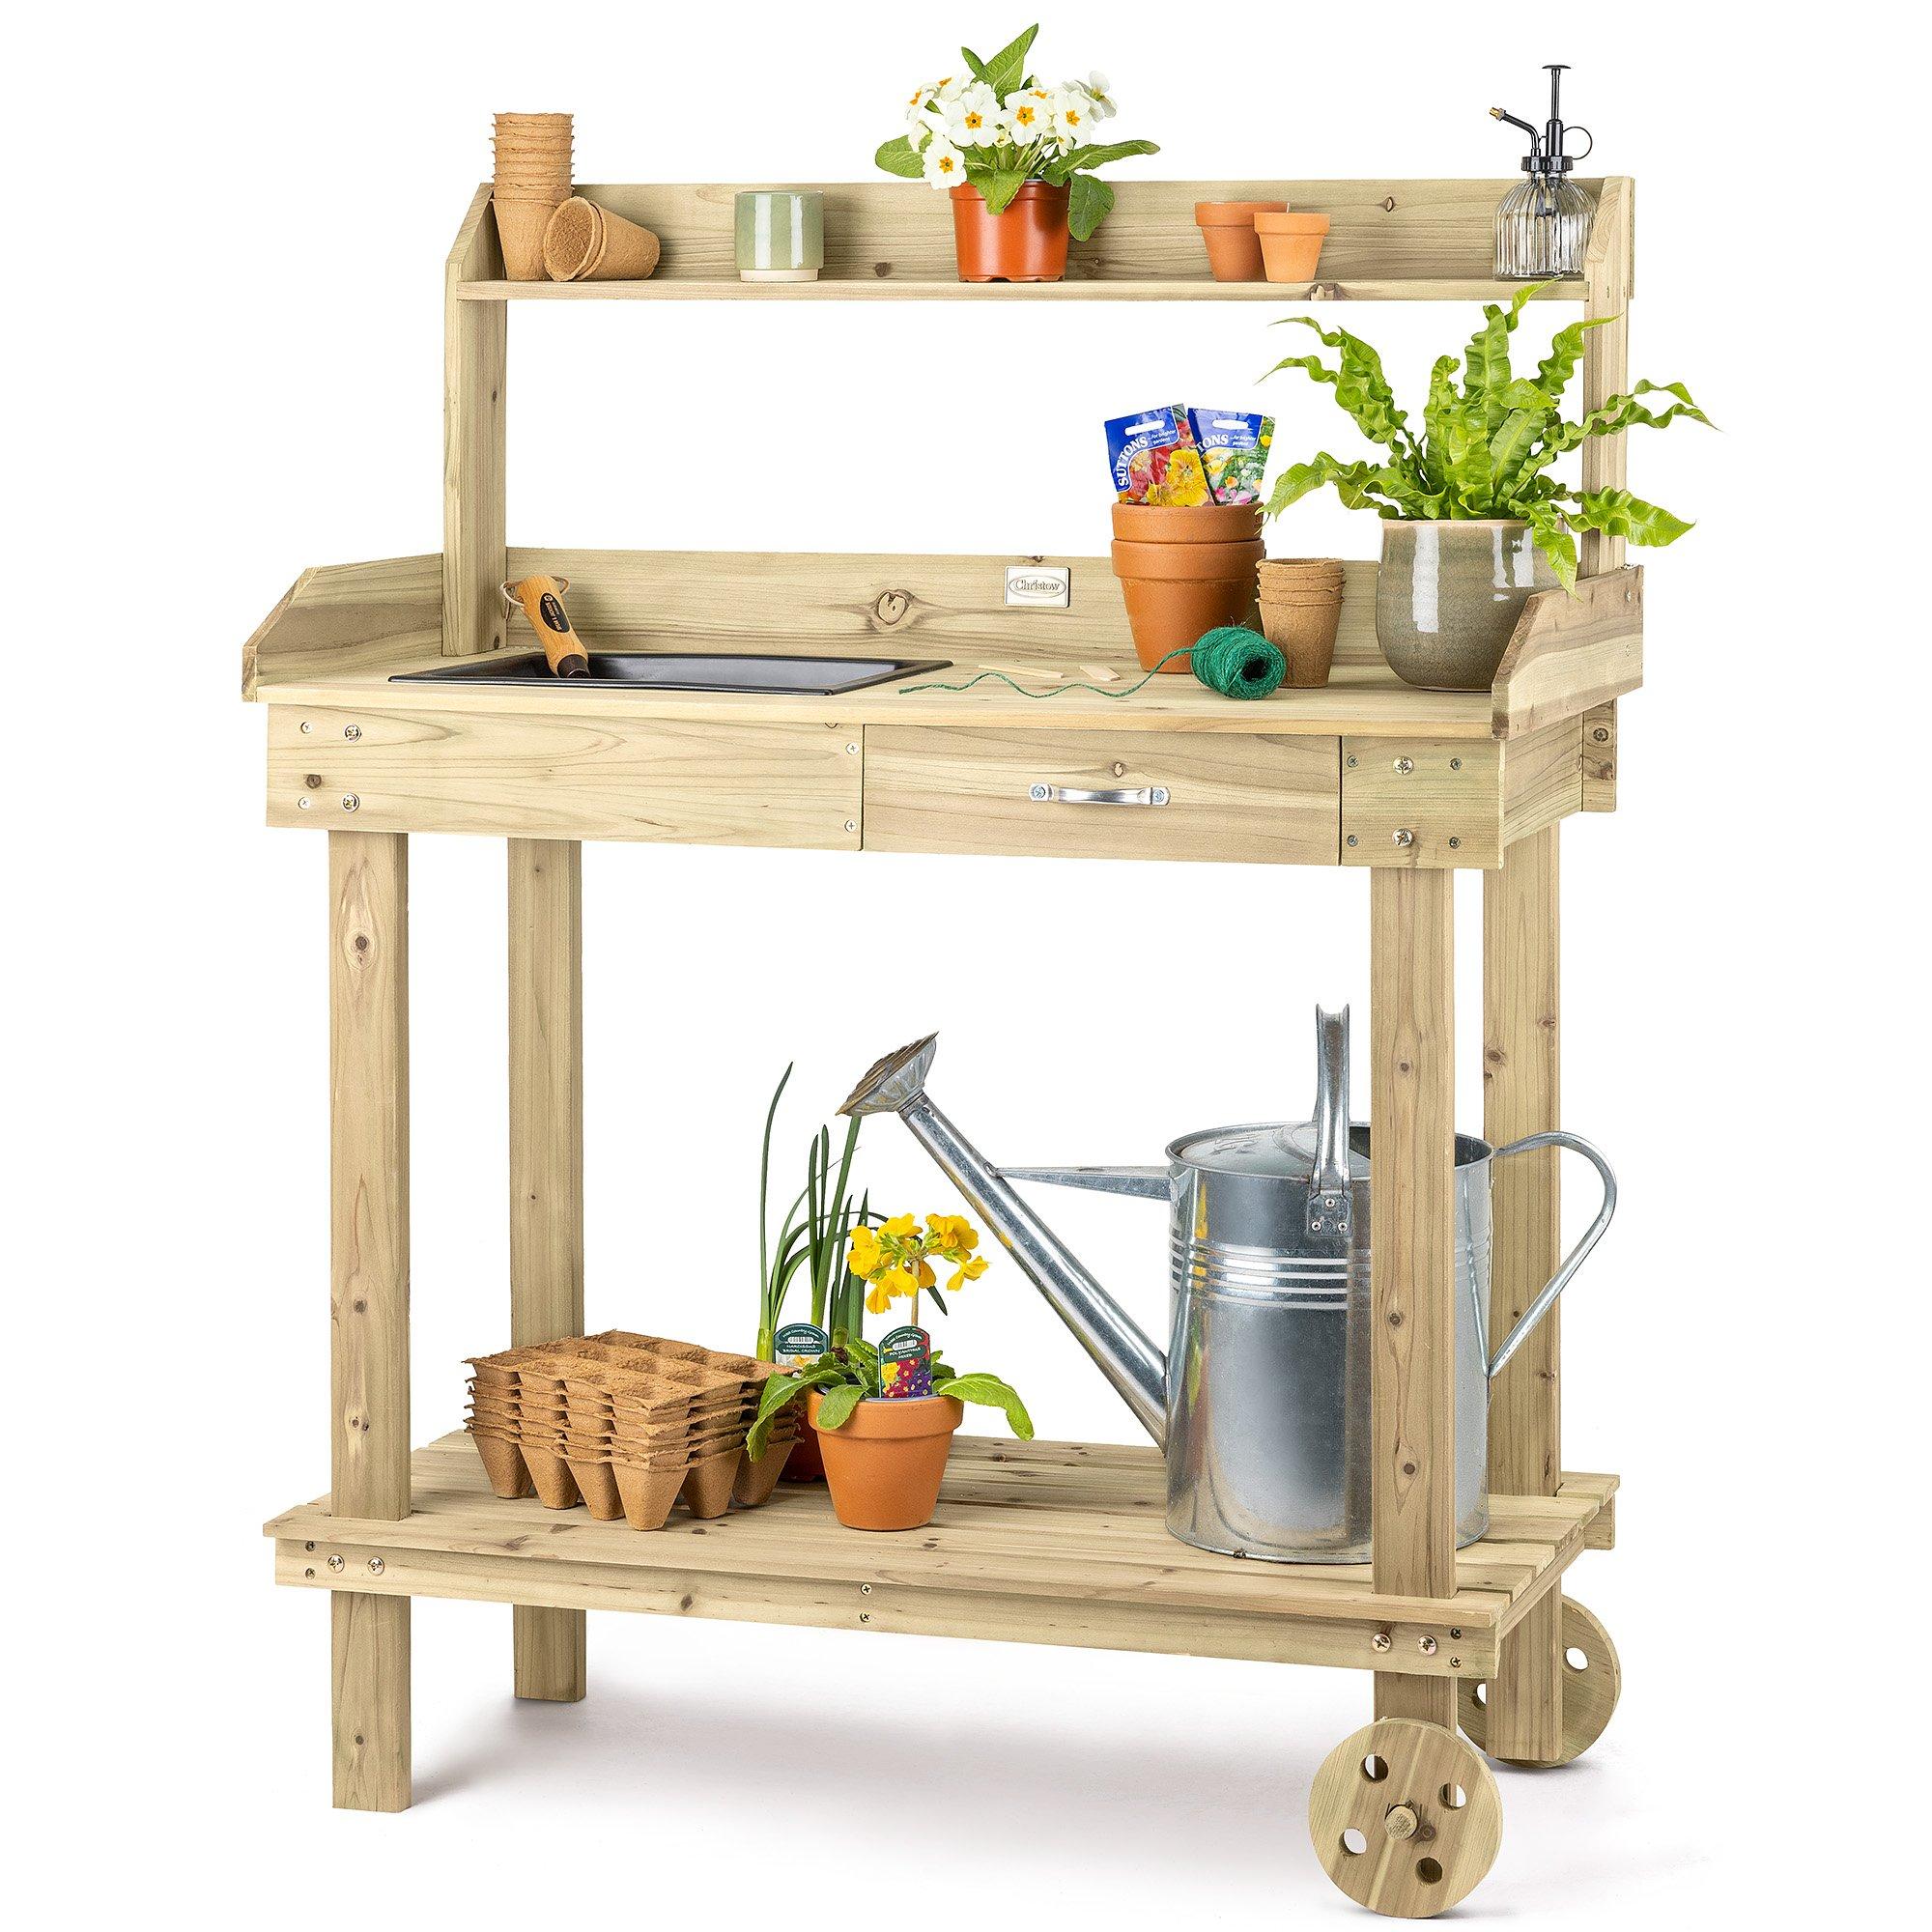 Garden Potting Table Bench Outdoor Wooden Workstation Wheels Tray